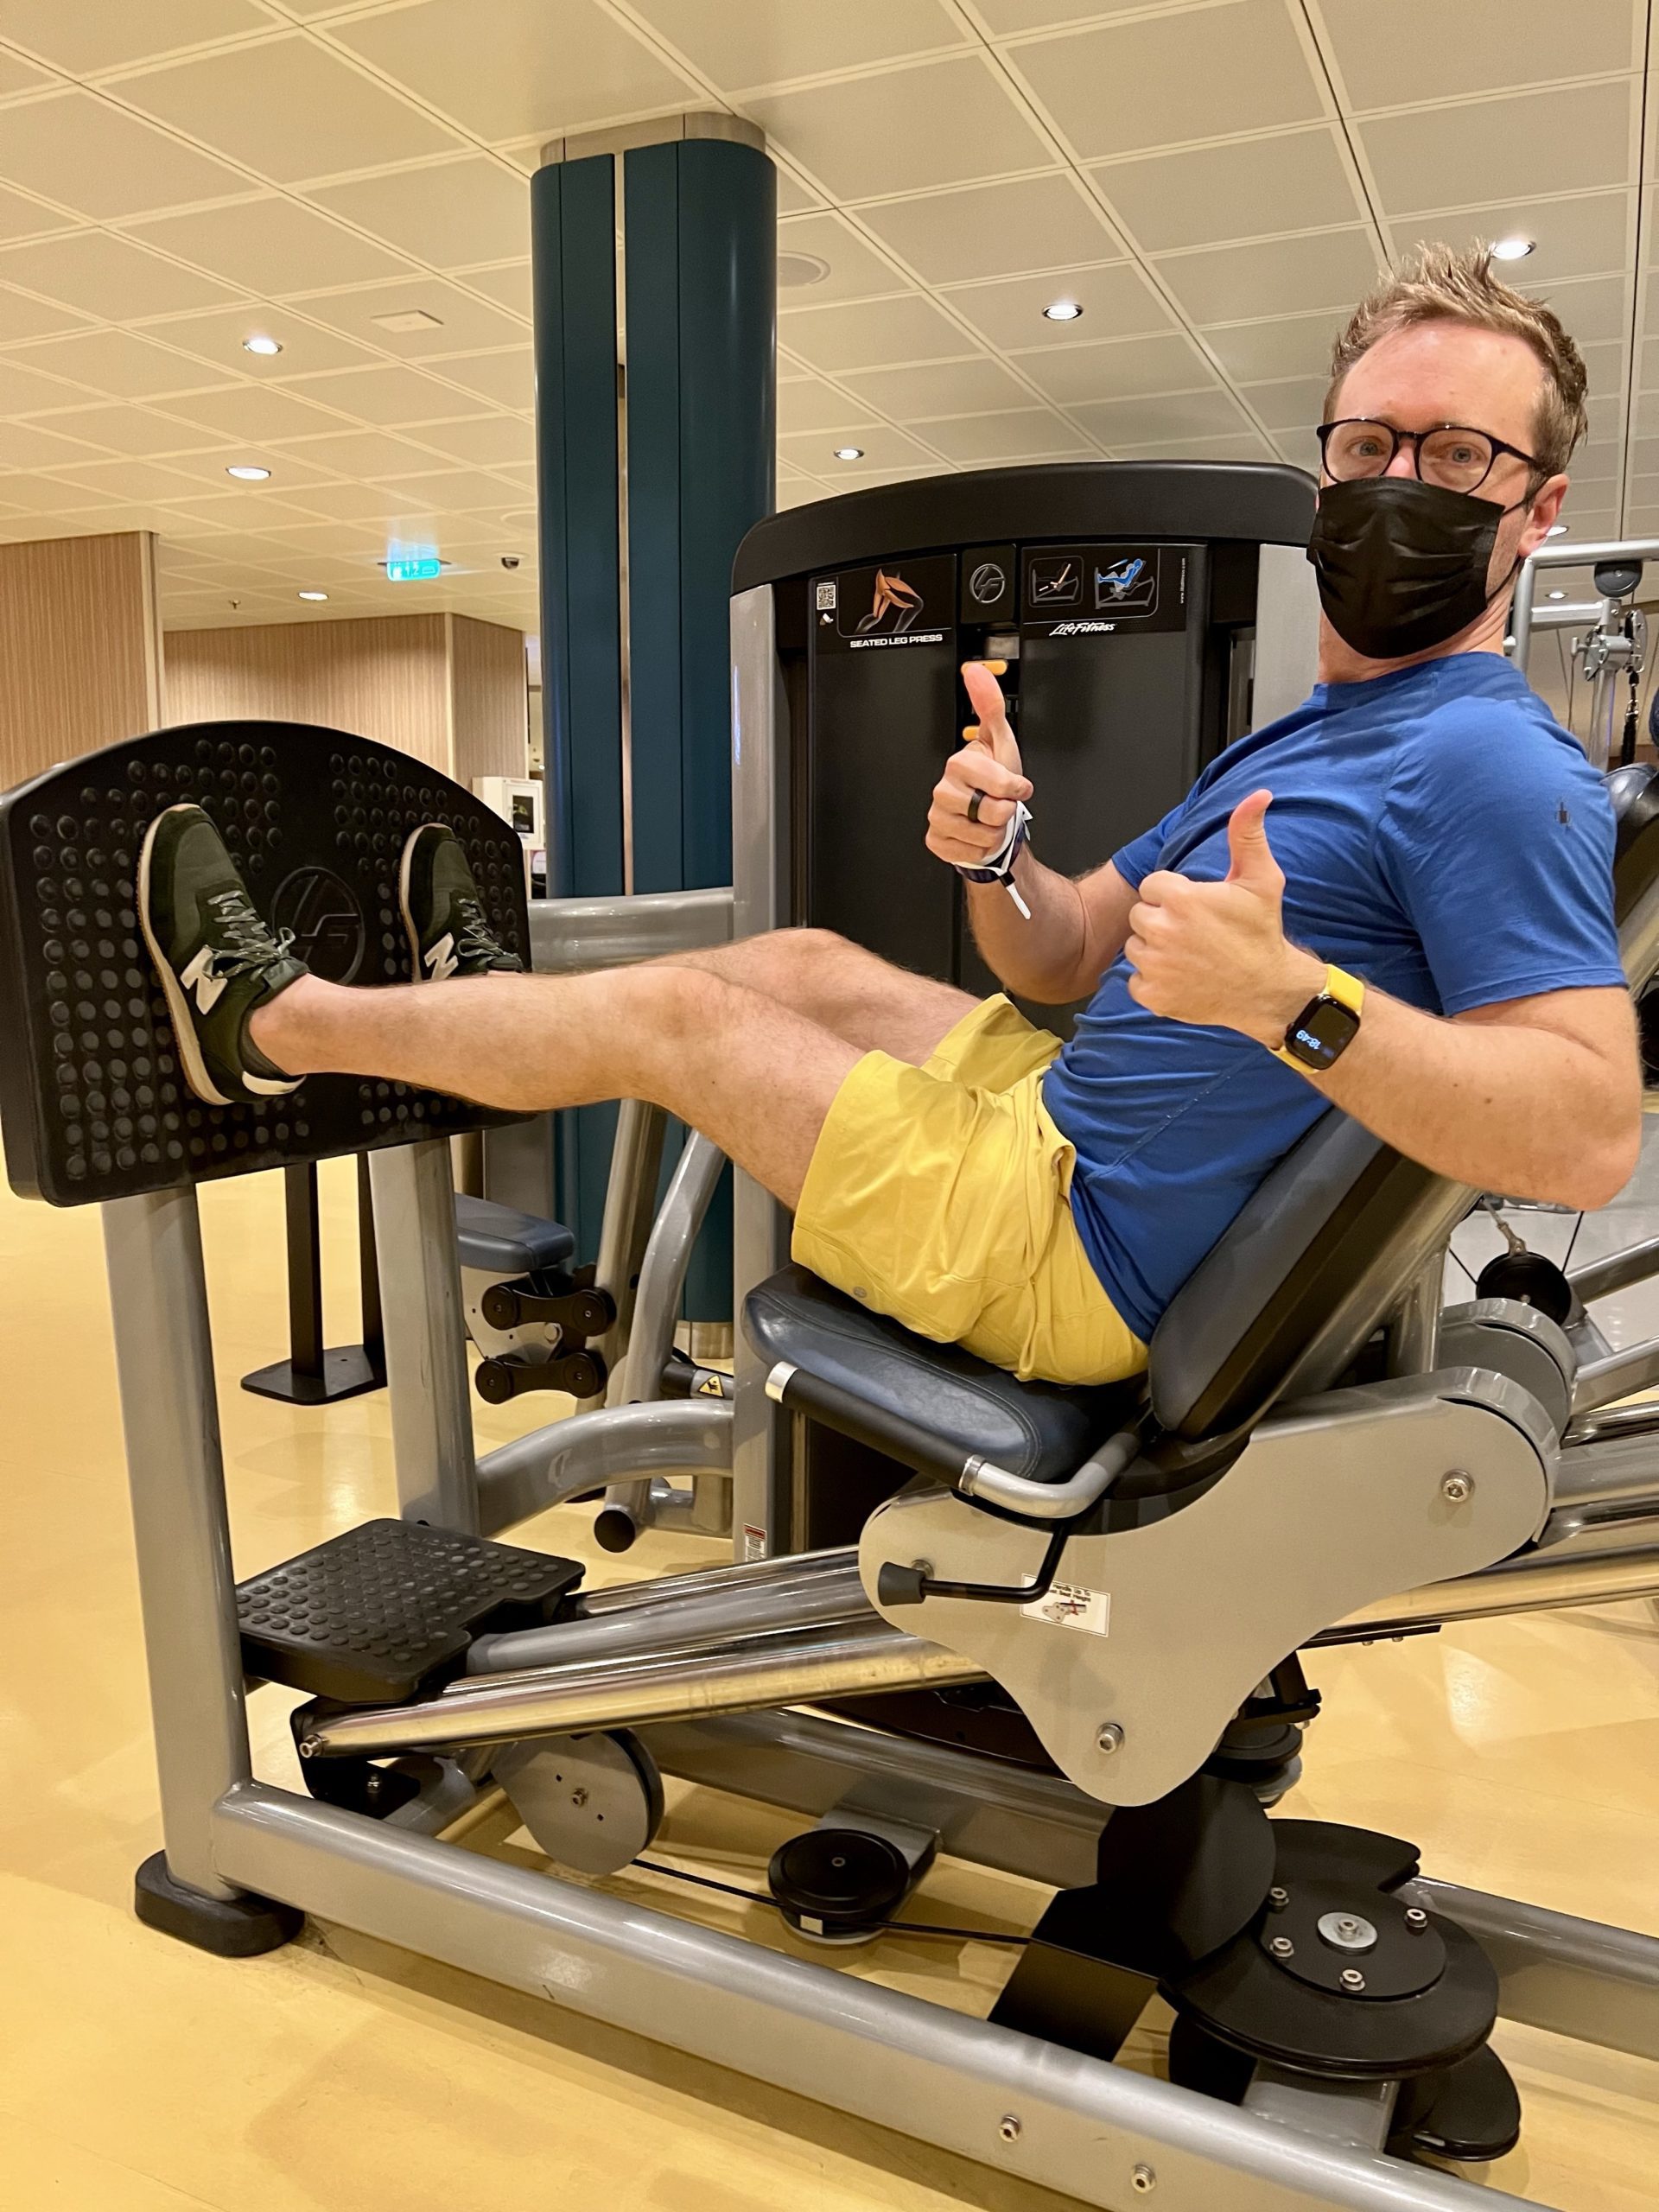 inside the gym, man sitting on leg press weights machine on Symphony of the Seas